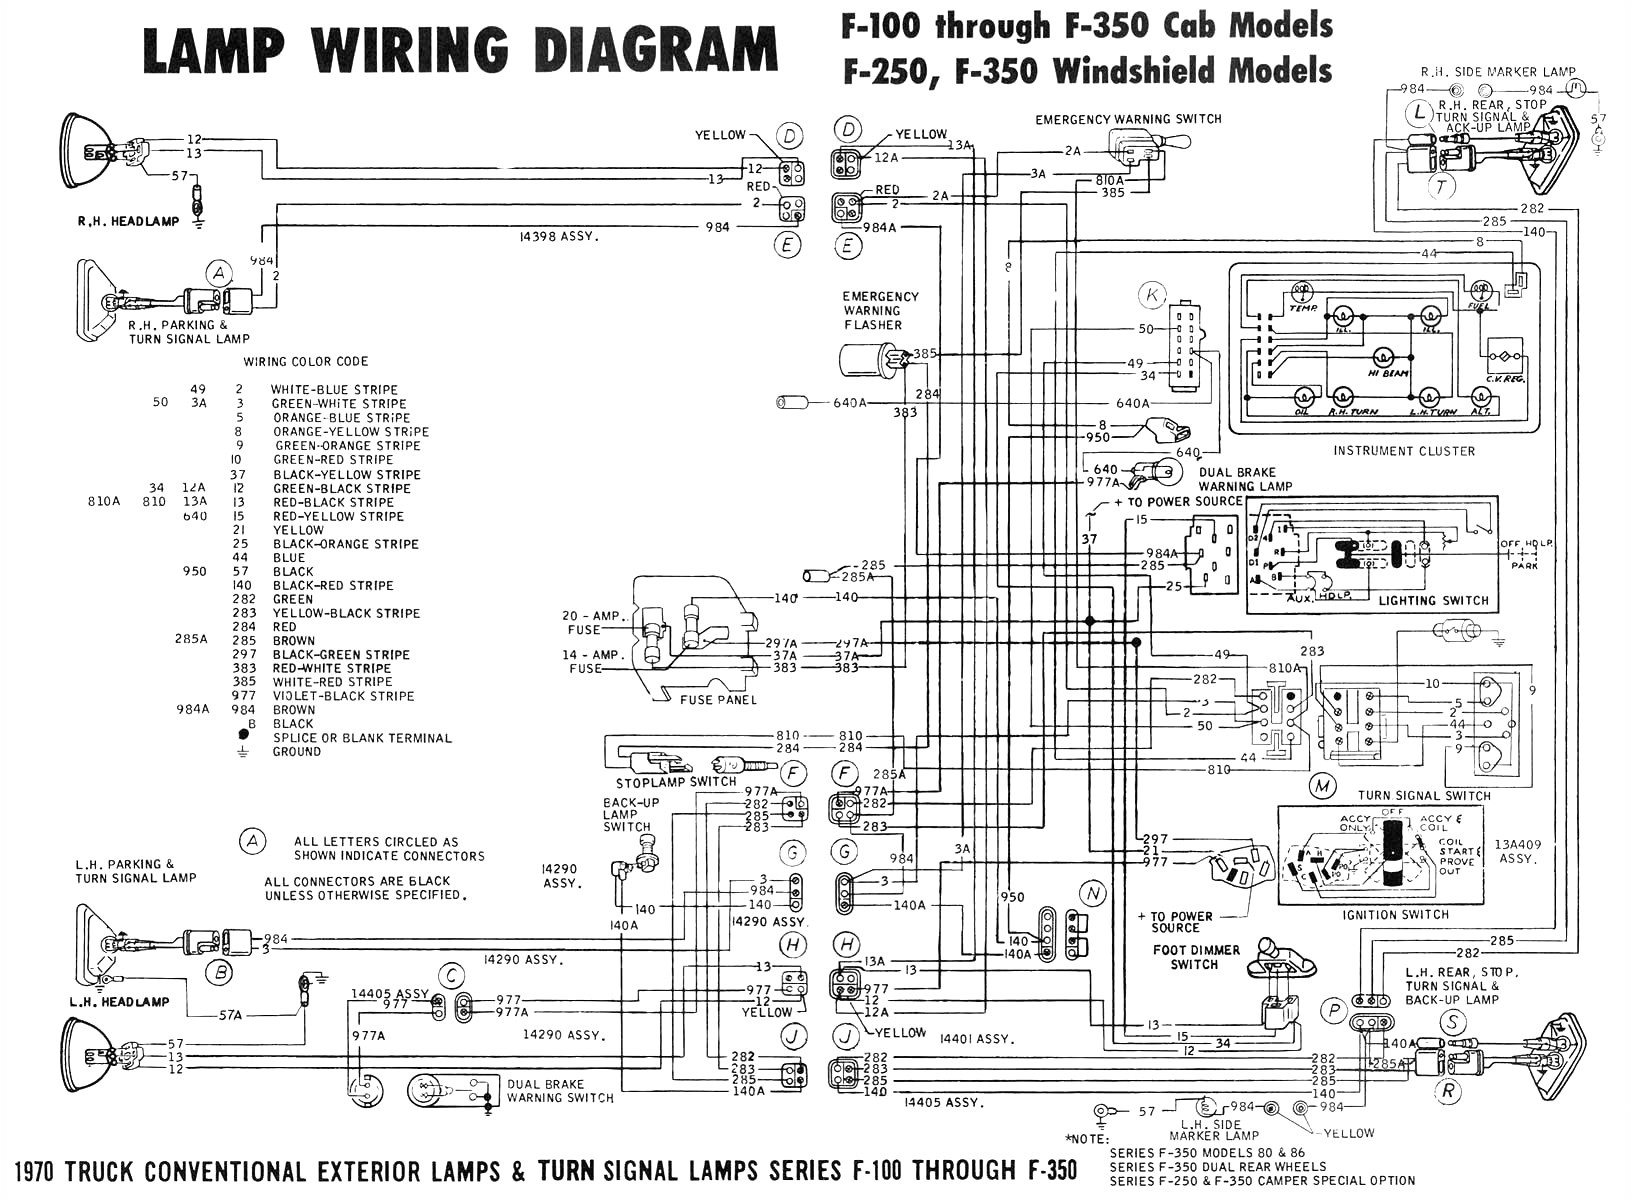 wiring diagrams for lighting circuits e2 80 93 junction box method wiring diagrams for lighting circuits e2 80 93 junction box method